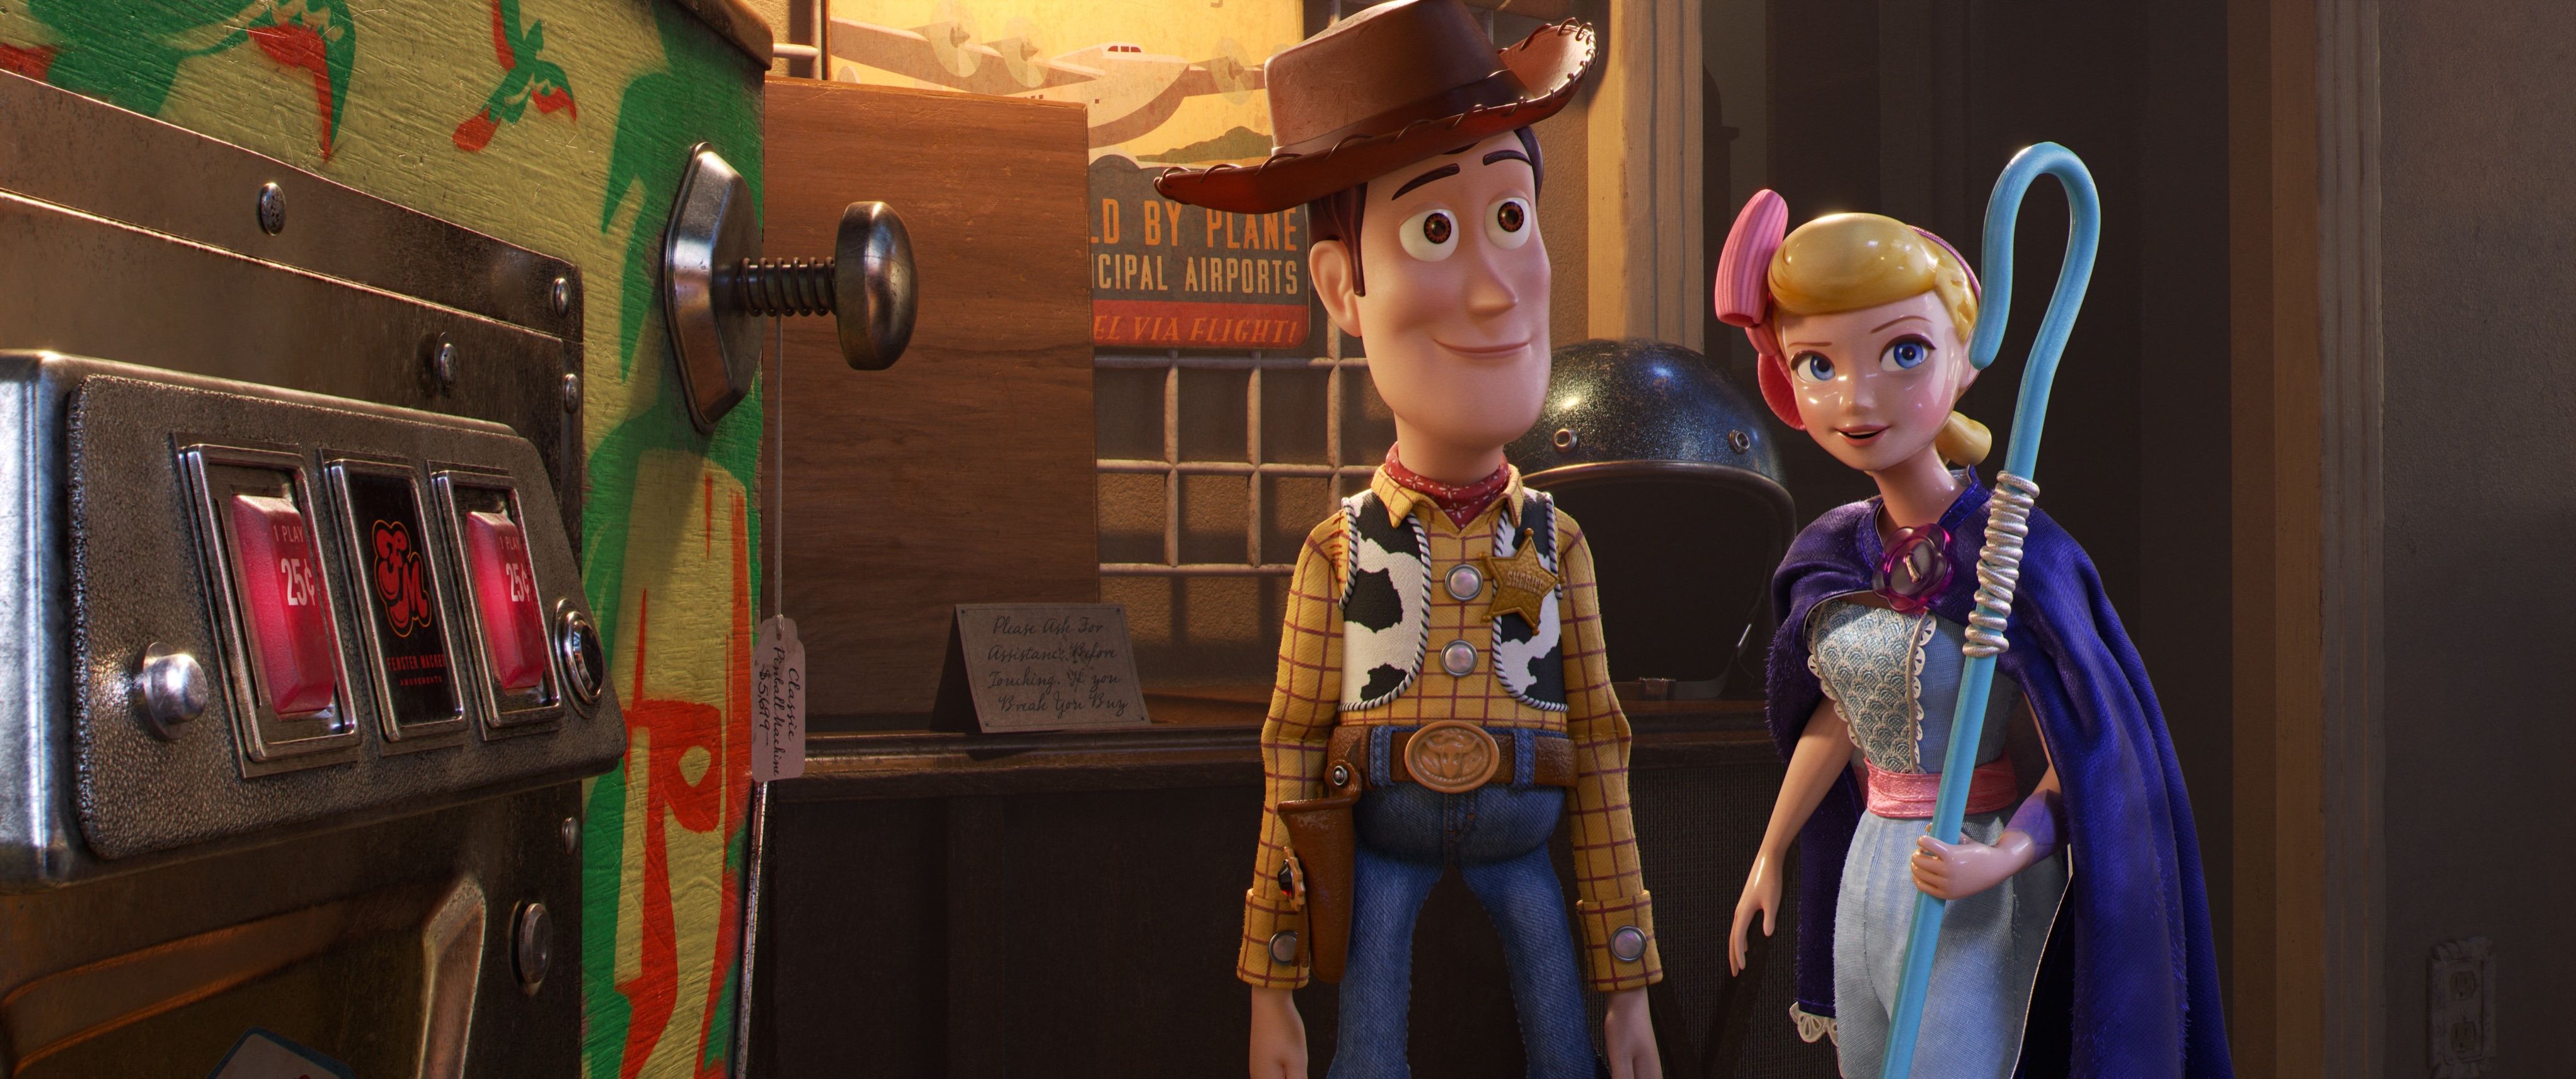 Toy Story 4 Woody and Forky photo